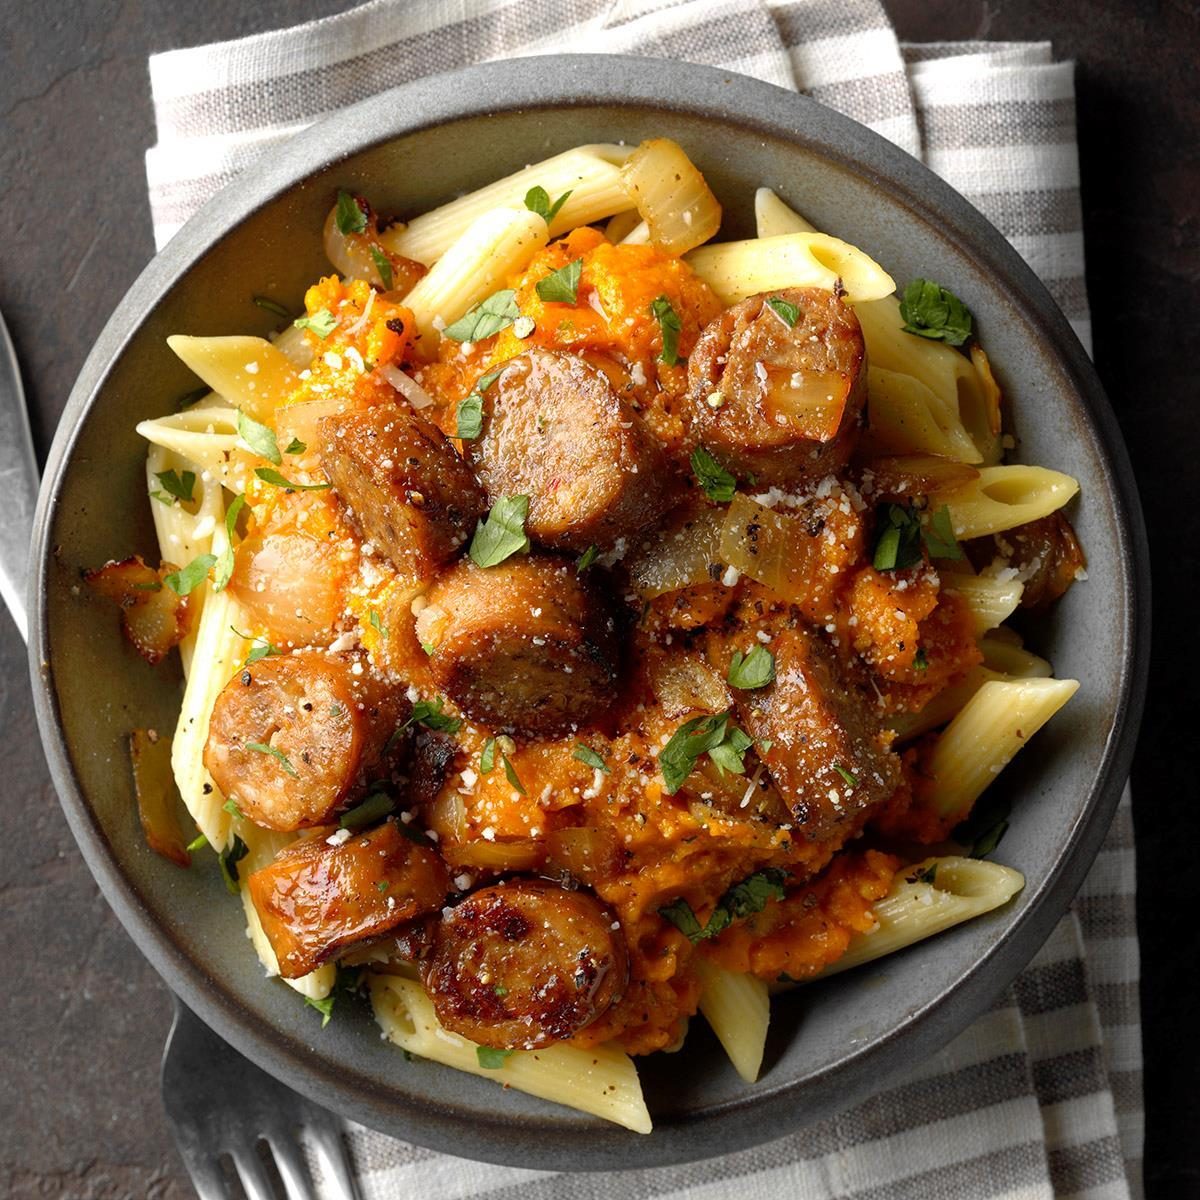 Day 9: Sausage and Squash Penne	